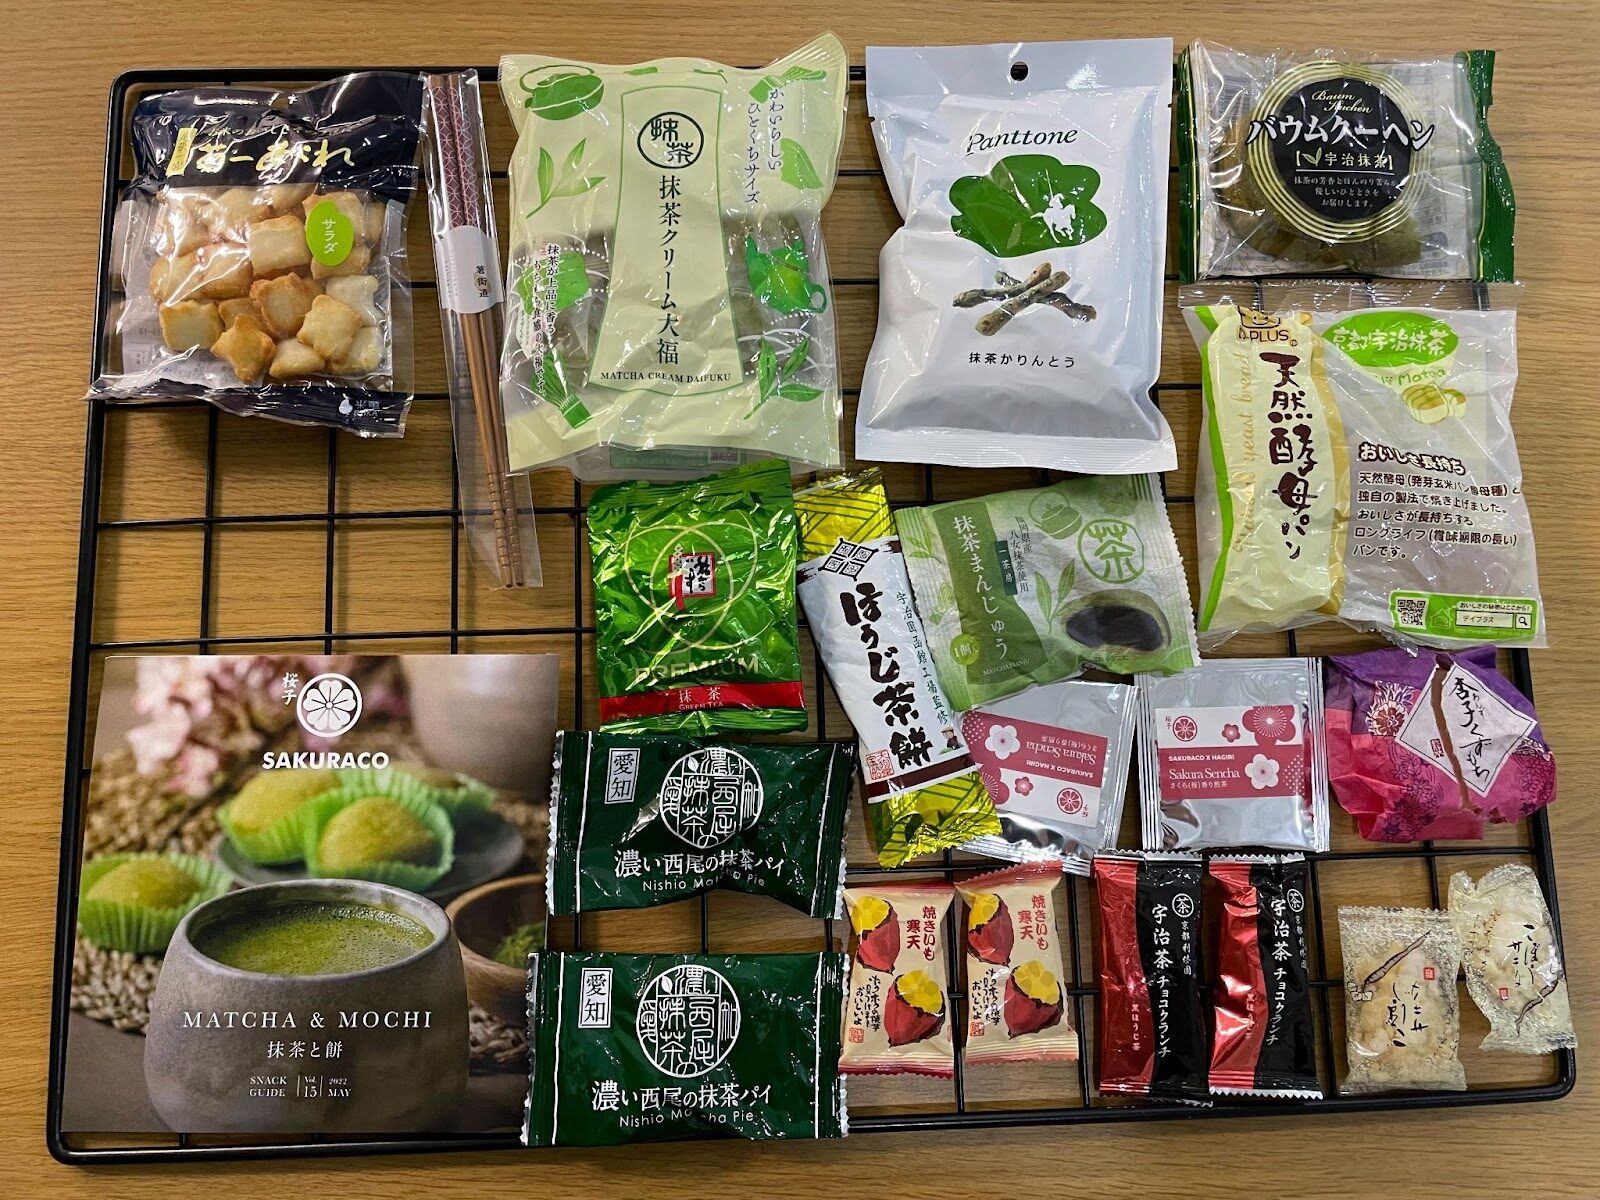 Bokksu box items placed on a board to show the quantity and quality of the products.